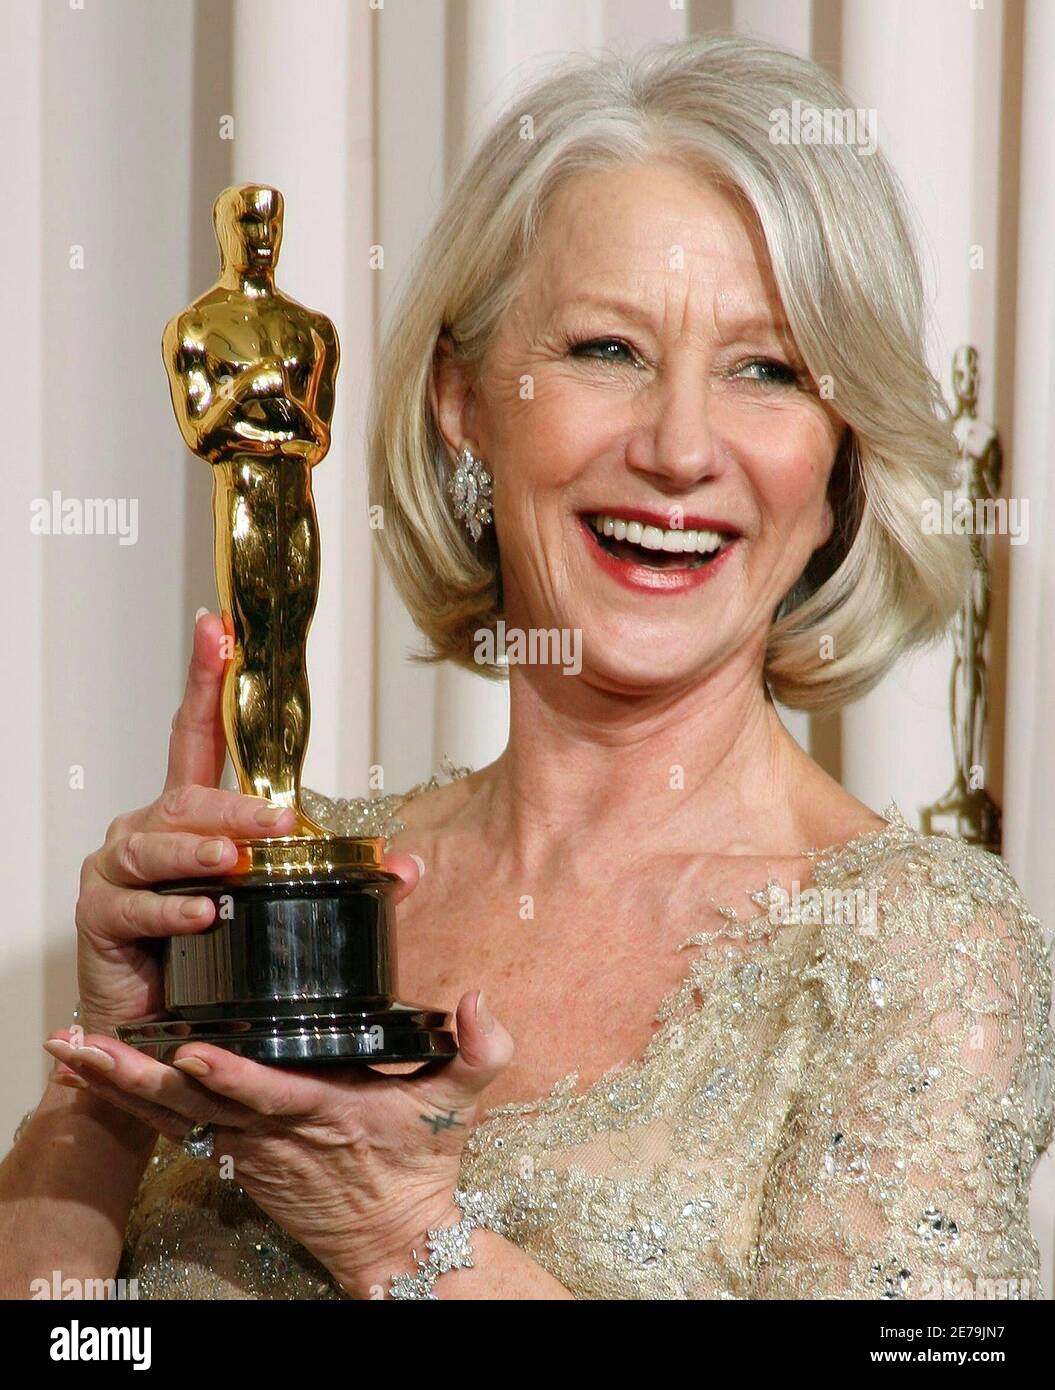 RNPS IMAGES OF THE YEAR 2007 -  ENTERTAINMENT - Helen Mirren poses with her Oscar for Best Actress for her work in 'The Queen' backstage at the 79th Annual Academy Awards in Hollywood, California, February 25, 2007.  REUTERS/Mike Blake   (UNITED STATES) Stock Photo